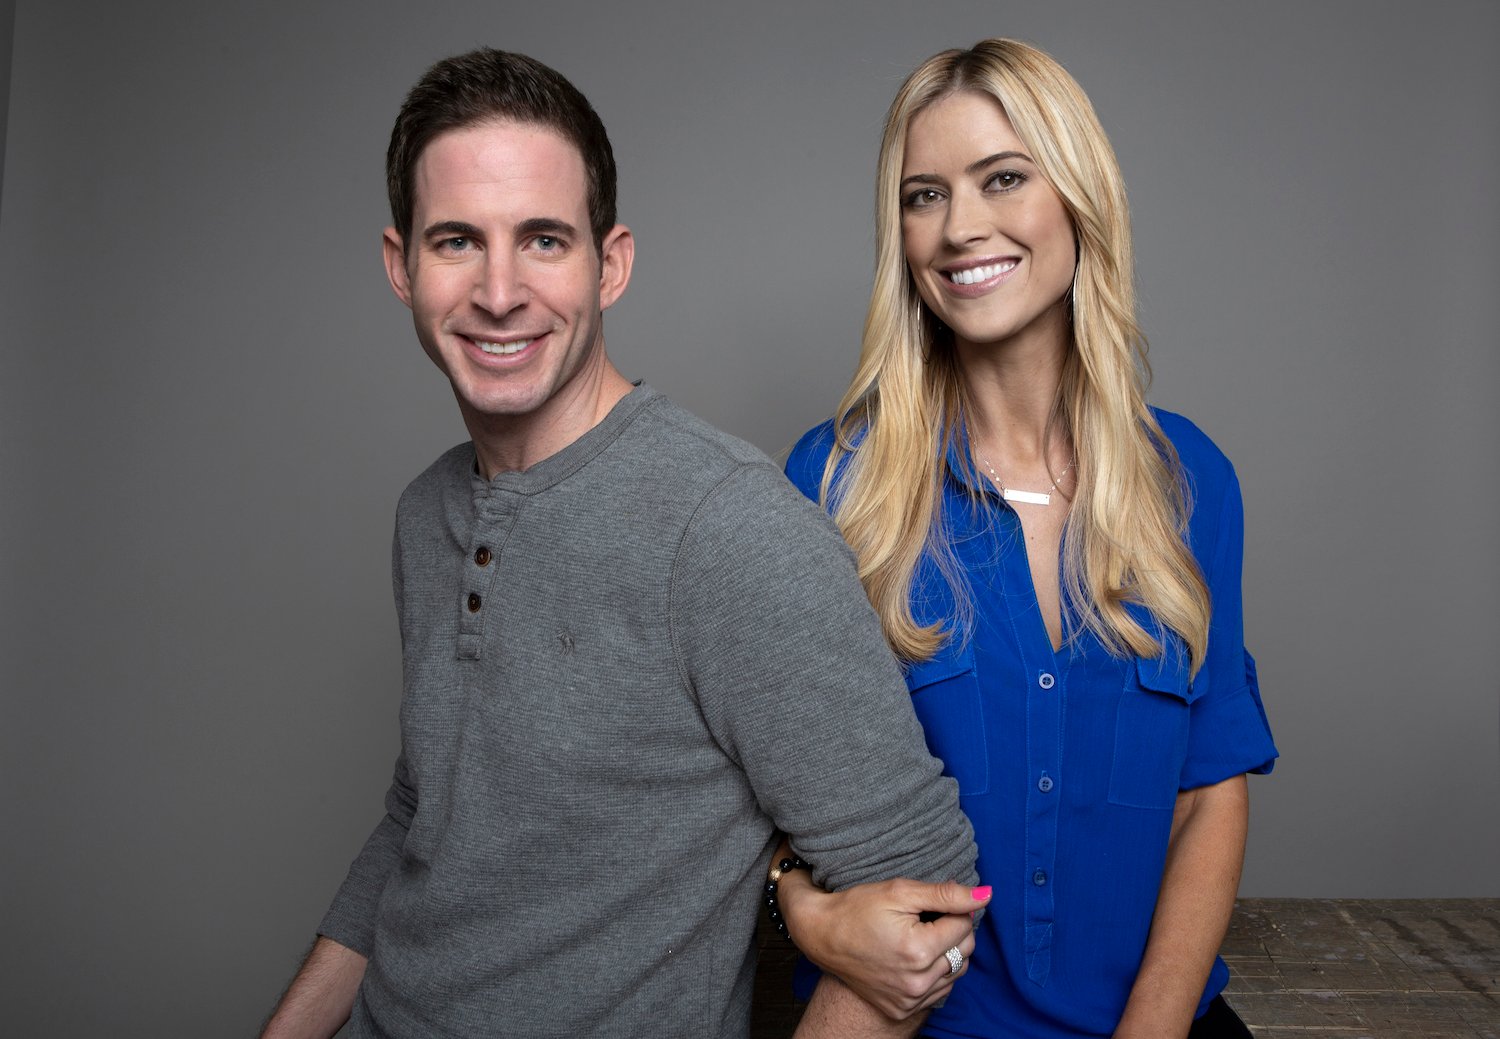 Christina Haack Beats Tarek El Moussa at His Own Game on ‘Flip or Flop’ as Series Comes to an End